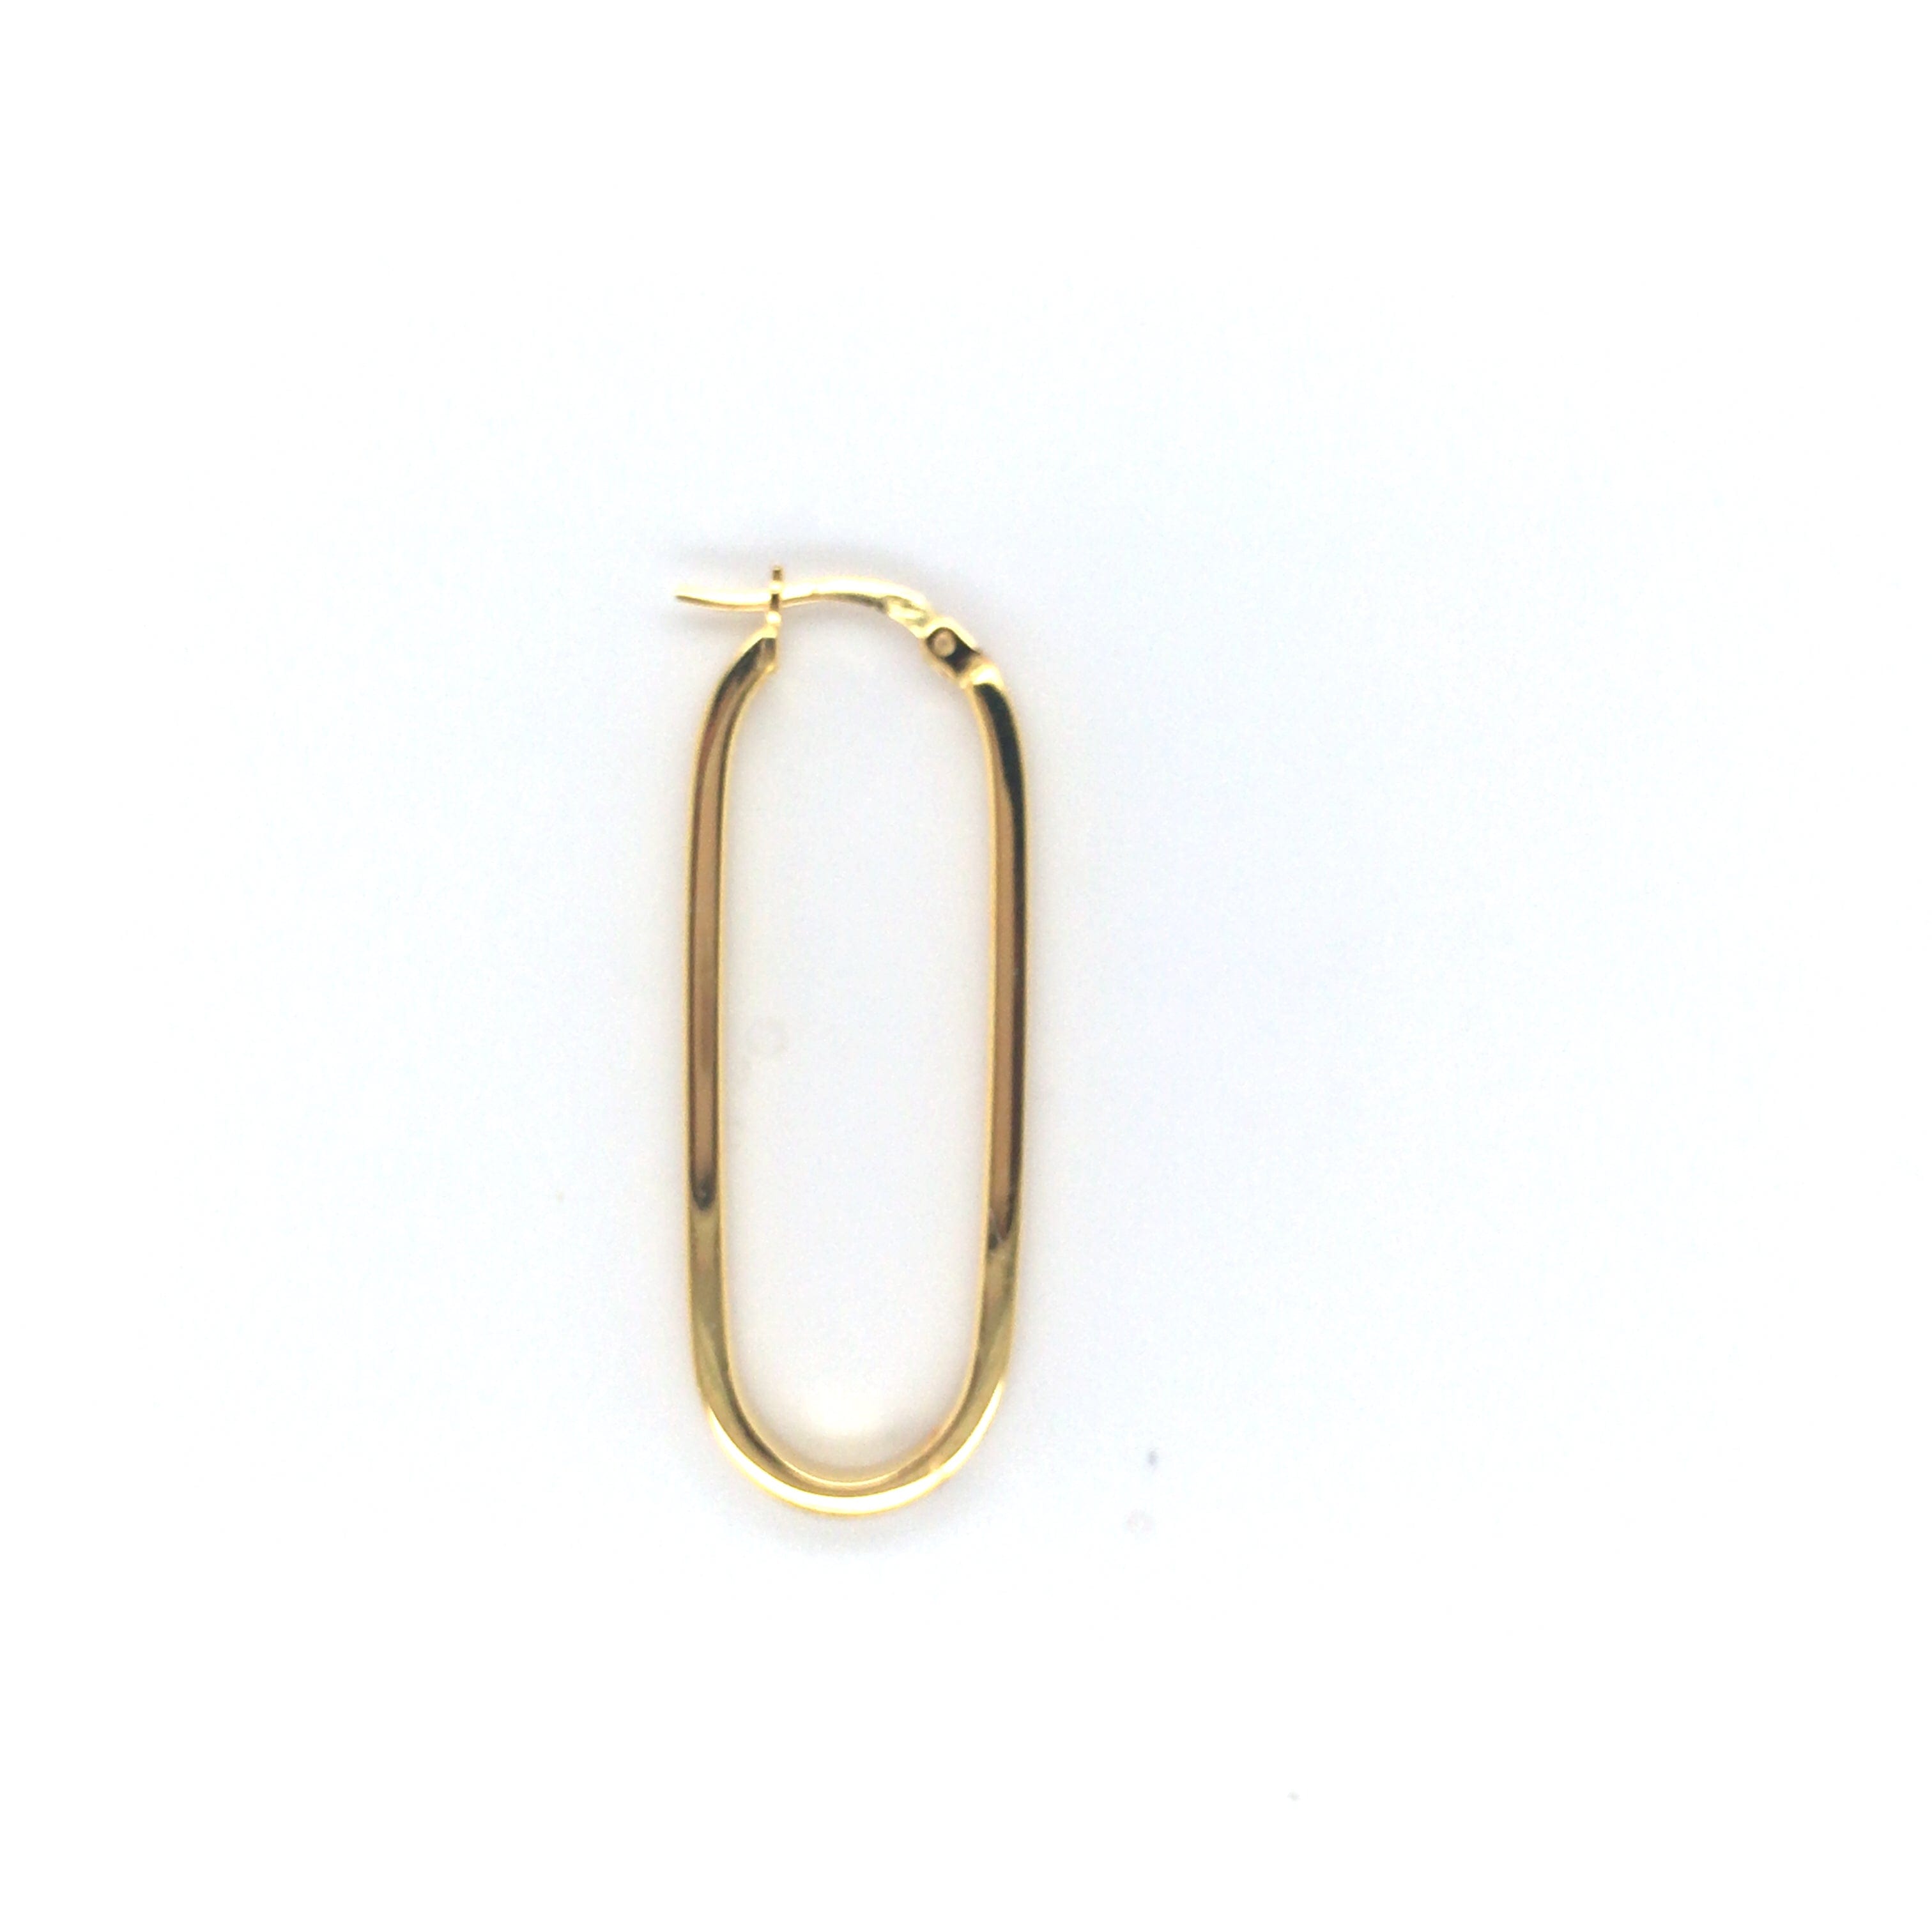 Lynora Silver Earring Gold Plated / Clear Lynora Sterling Silver Elongated Gold Hoop Earrings